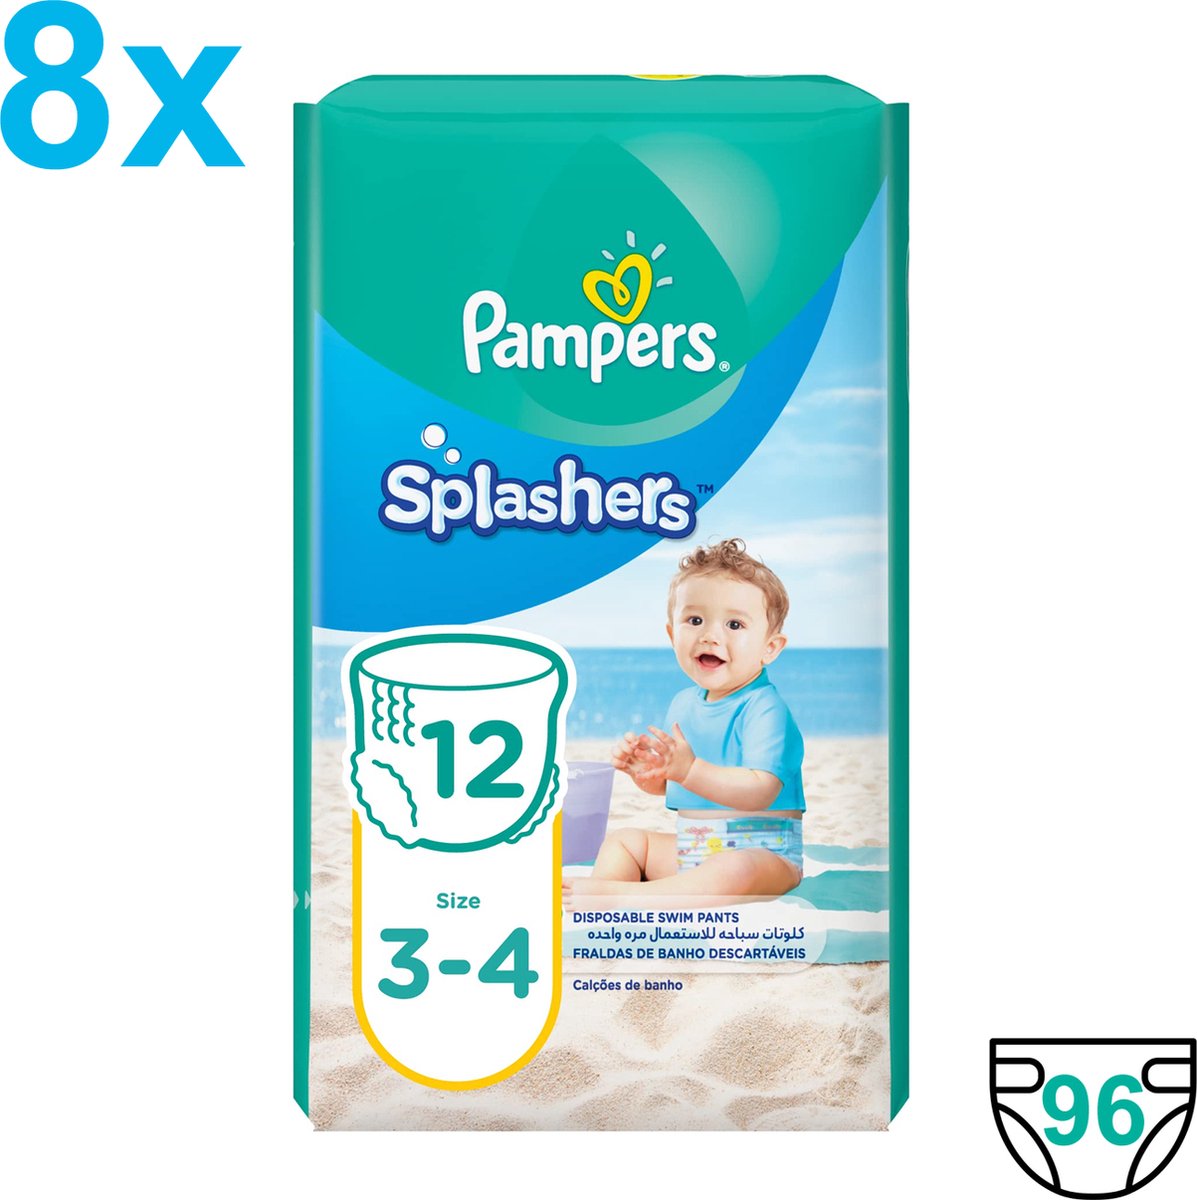 Pampers - Splashers - Taille 3-4 - Couches de bain jetables - 96 pièces -  Value Pack | bol